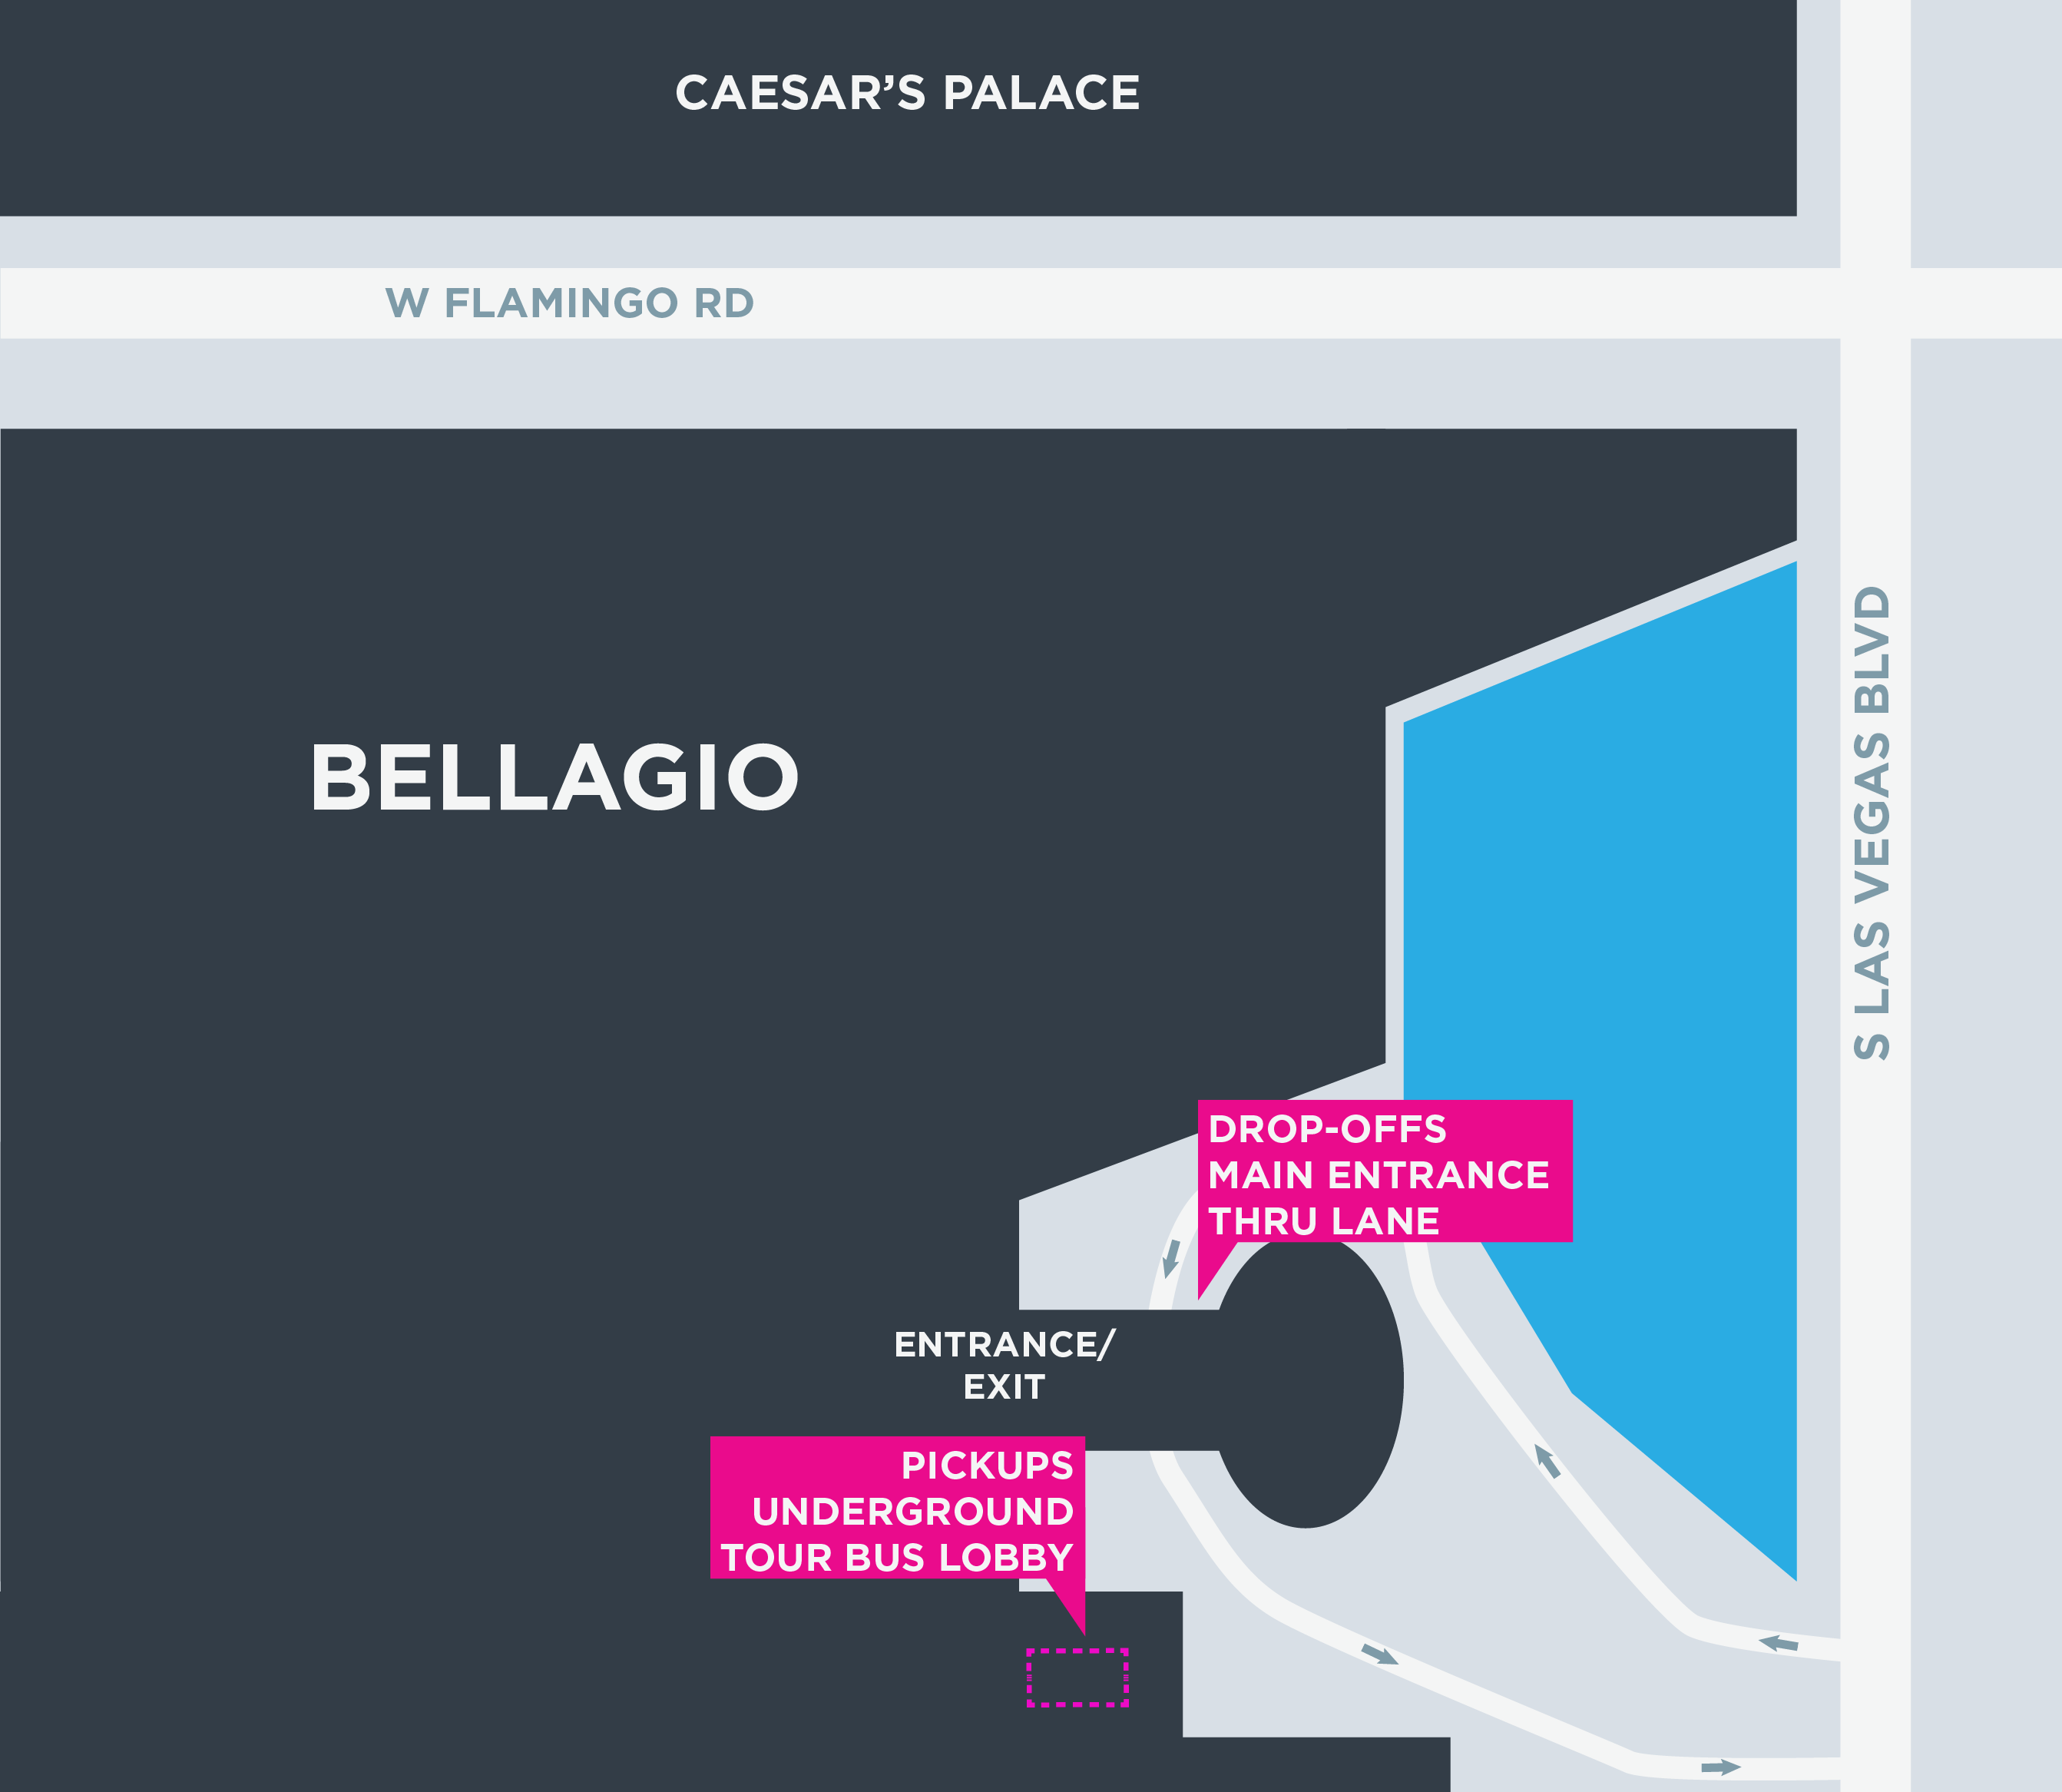 This image shows a map of the Bellagio, including pickup and dropoff areas.